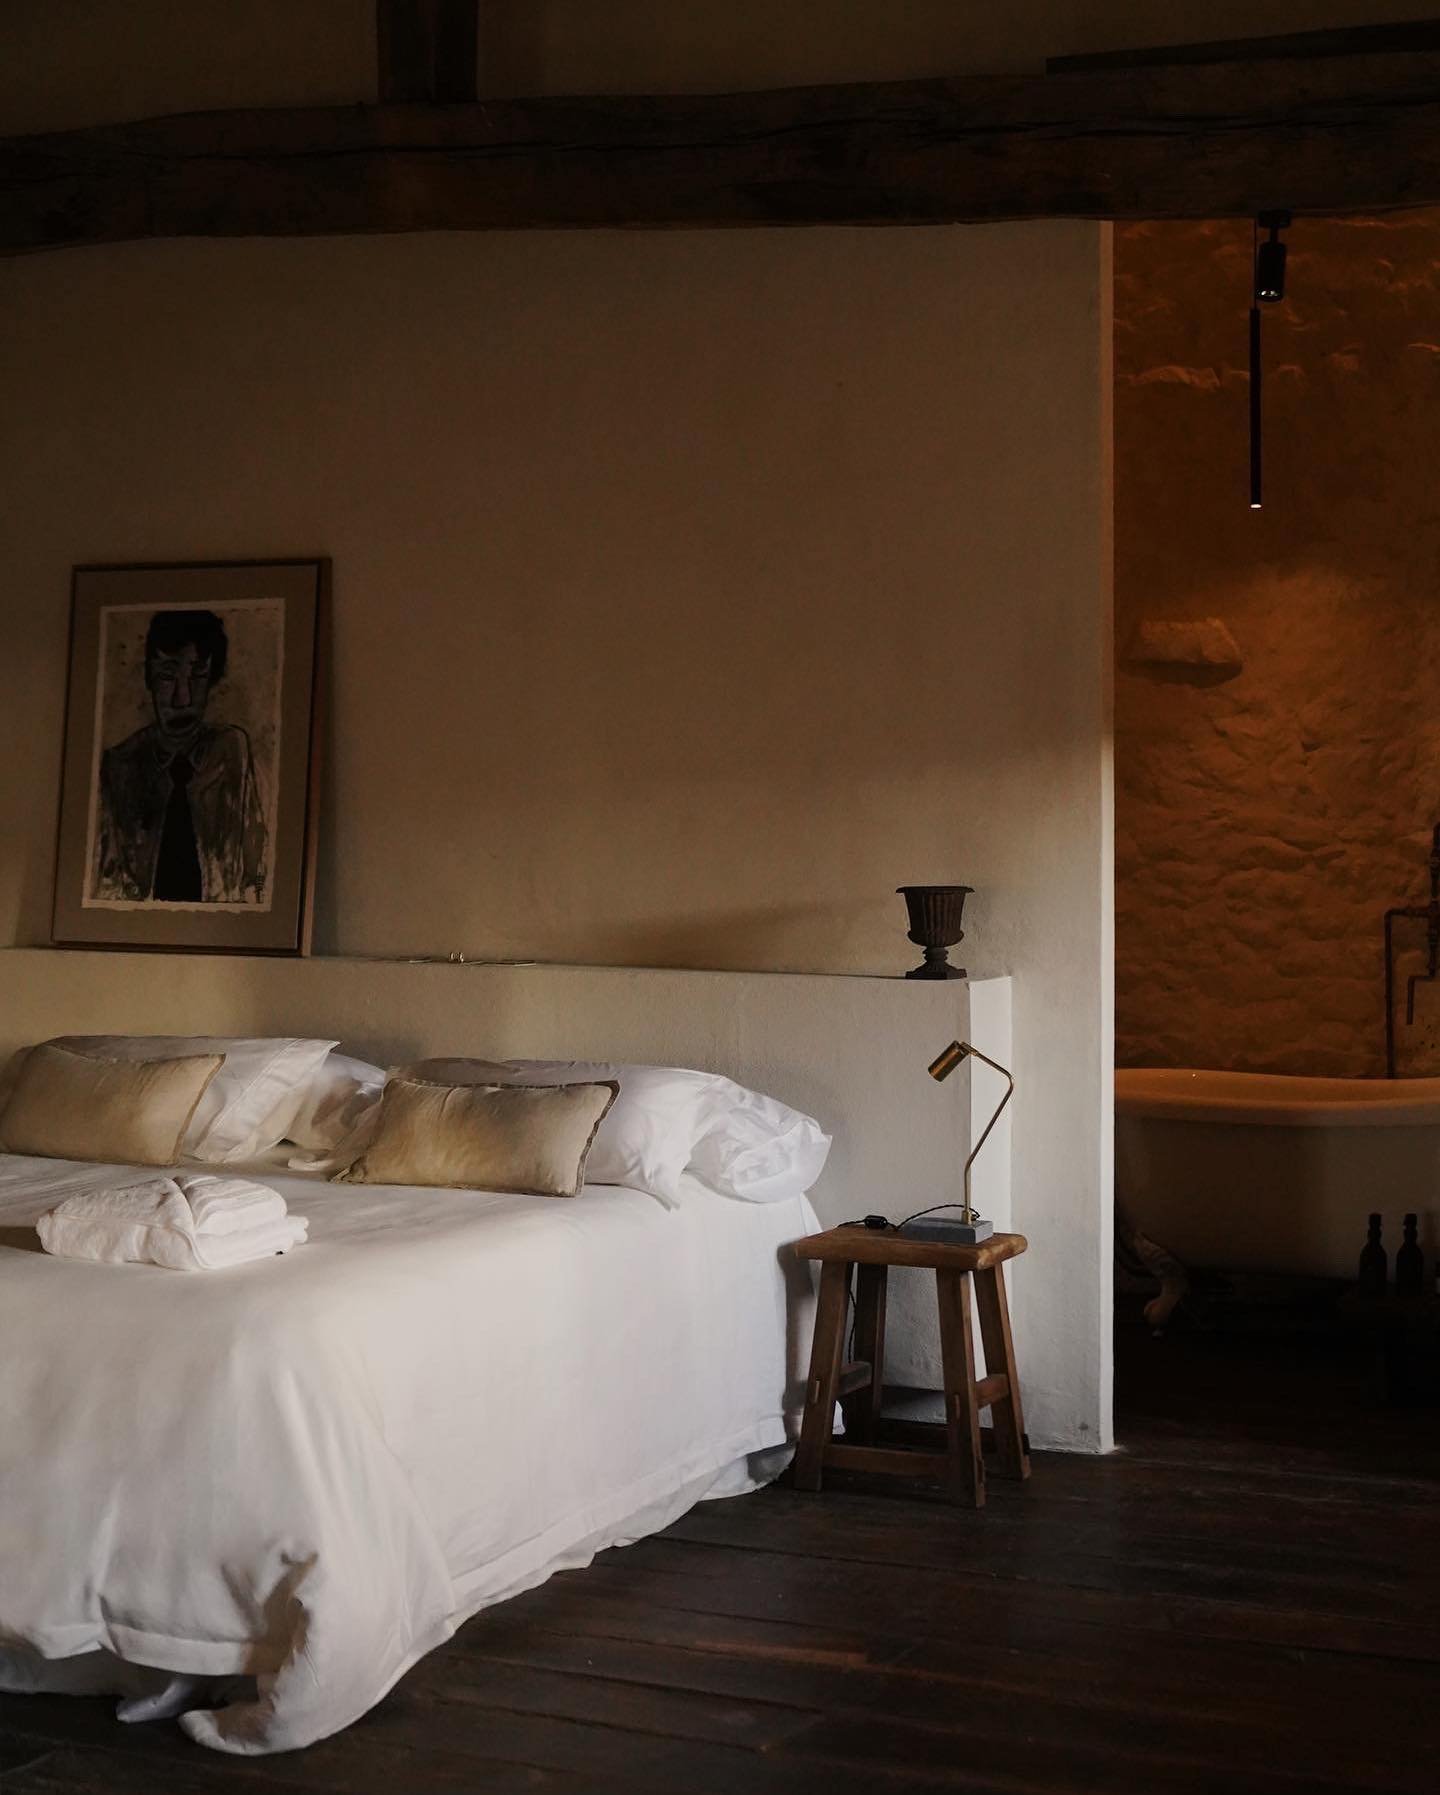 Located in the lush mountains of Asturias, @solo.palacio is a unique hotel. Housed in a 16th-century palace, the atmosphere is wabi-sabi, and has been restored with a focus on handmade charm rather than perfection, offering a luxurious yet unpretenti